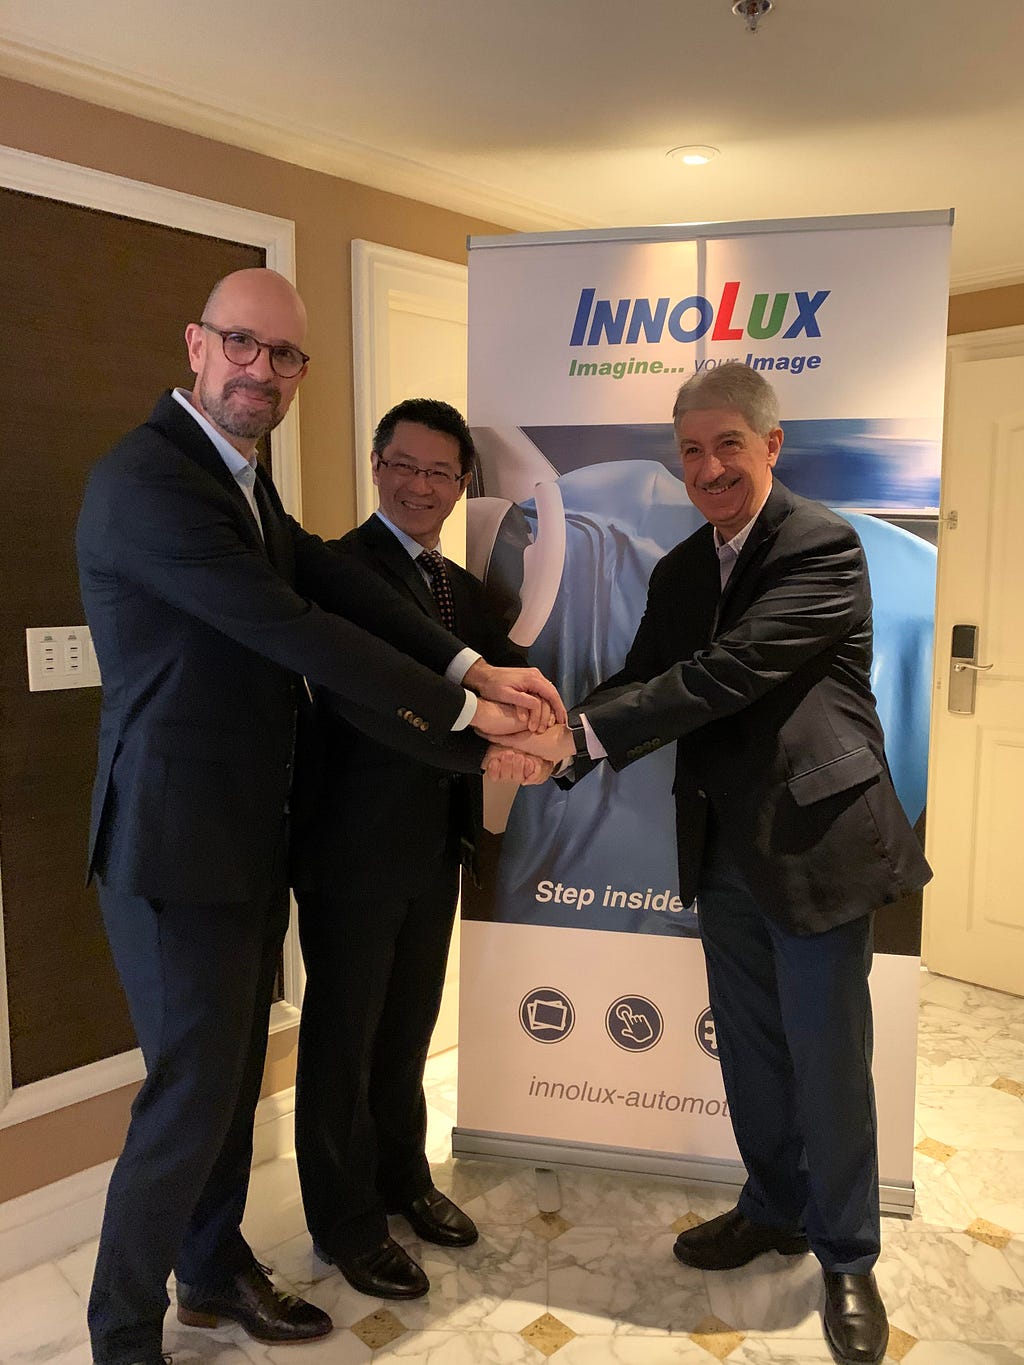 Innolux and Tanvas executives shaking hands in front of an Innolux banner stand